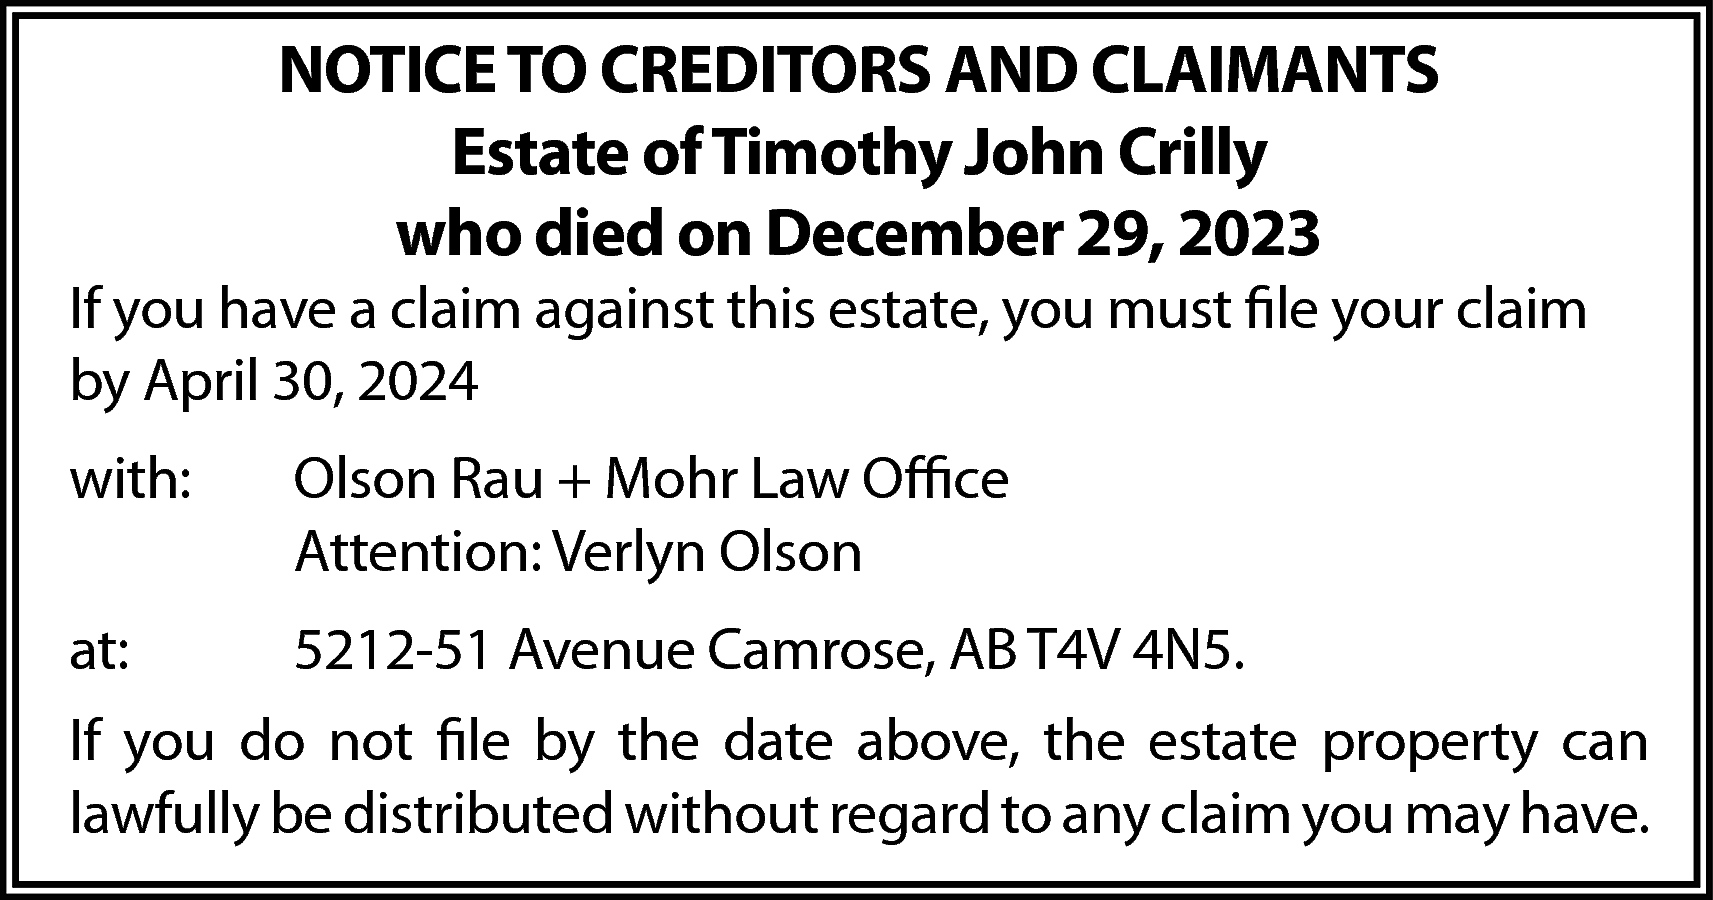 NOTICE TO CREDITORS AND CLAIMANTS  NOTICE TO CREDITORS AND CLAIMANTS  Estate of Timothy John Crilly  who died on December 29, 2023    If you have a claim against this estate, you must file your claim  by April 30, 2024  with:    Olson Rau + Mohr Law Office  Attention: Verlyn Olson    at:    5212-51 Avenue Camrose, AB T4V 4N5.    If you do not file by the date above, the estate property can  lawfully be distributed without regard to any claim you may have.    